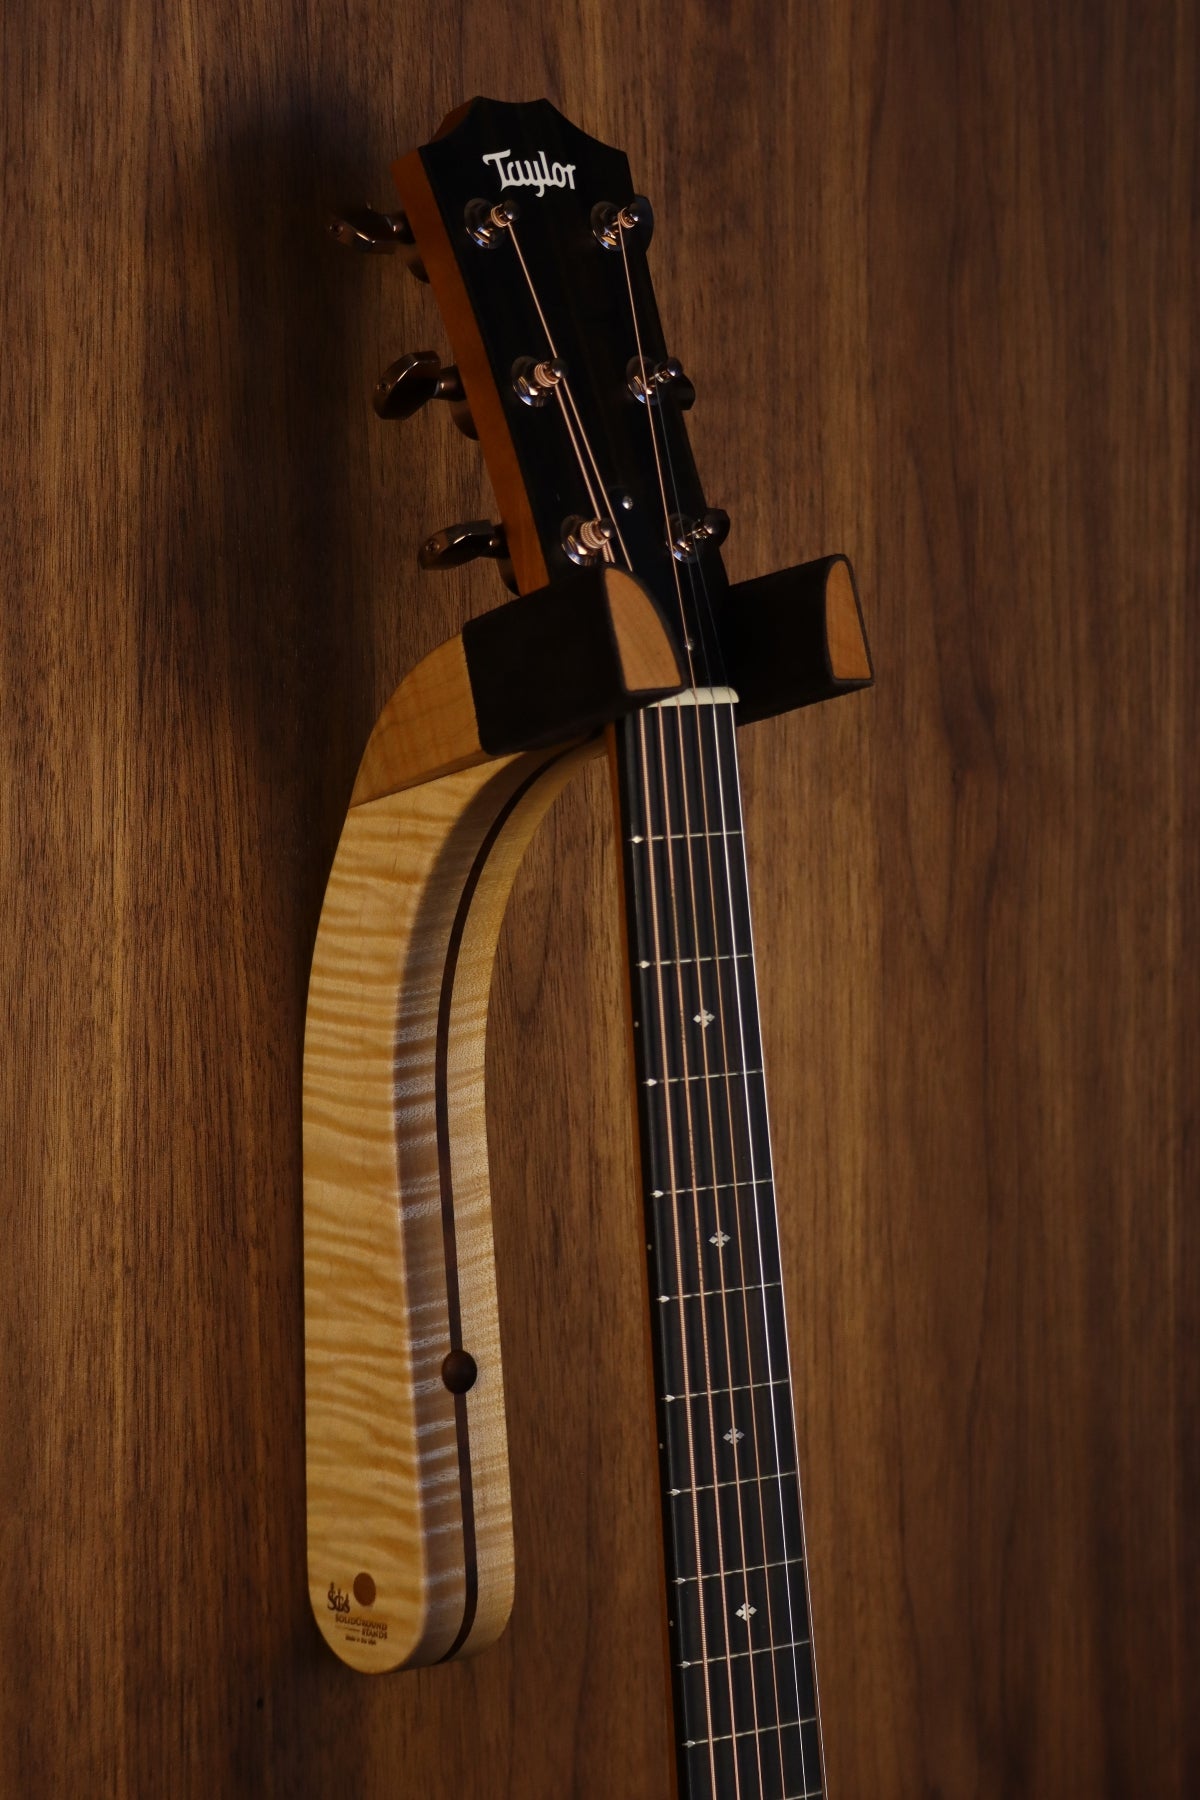 Curly maple and walnut wood guitar wall mount hanger installed on paneled wall with Taylor guitar